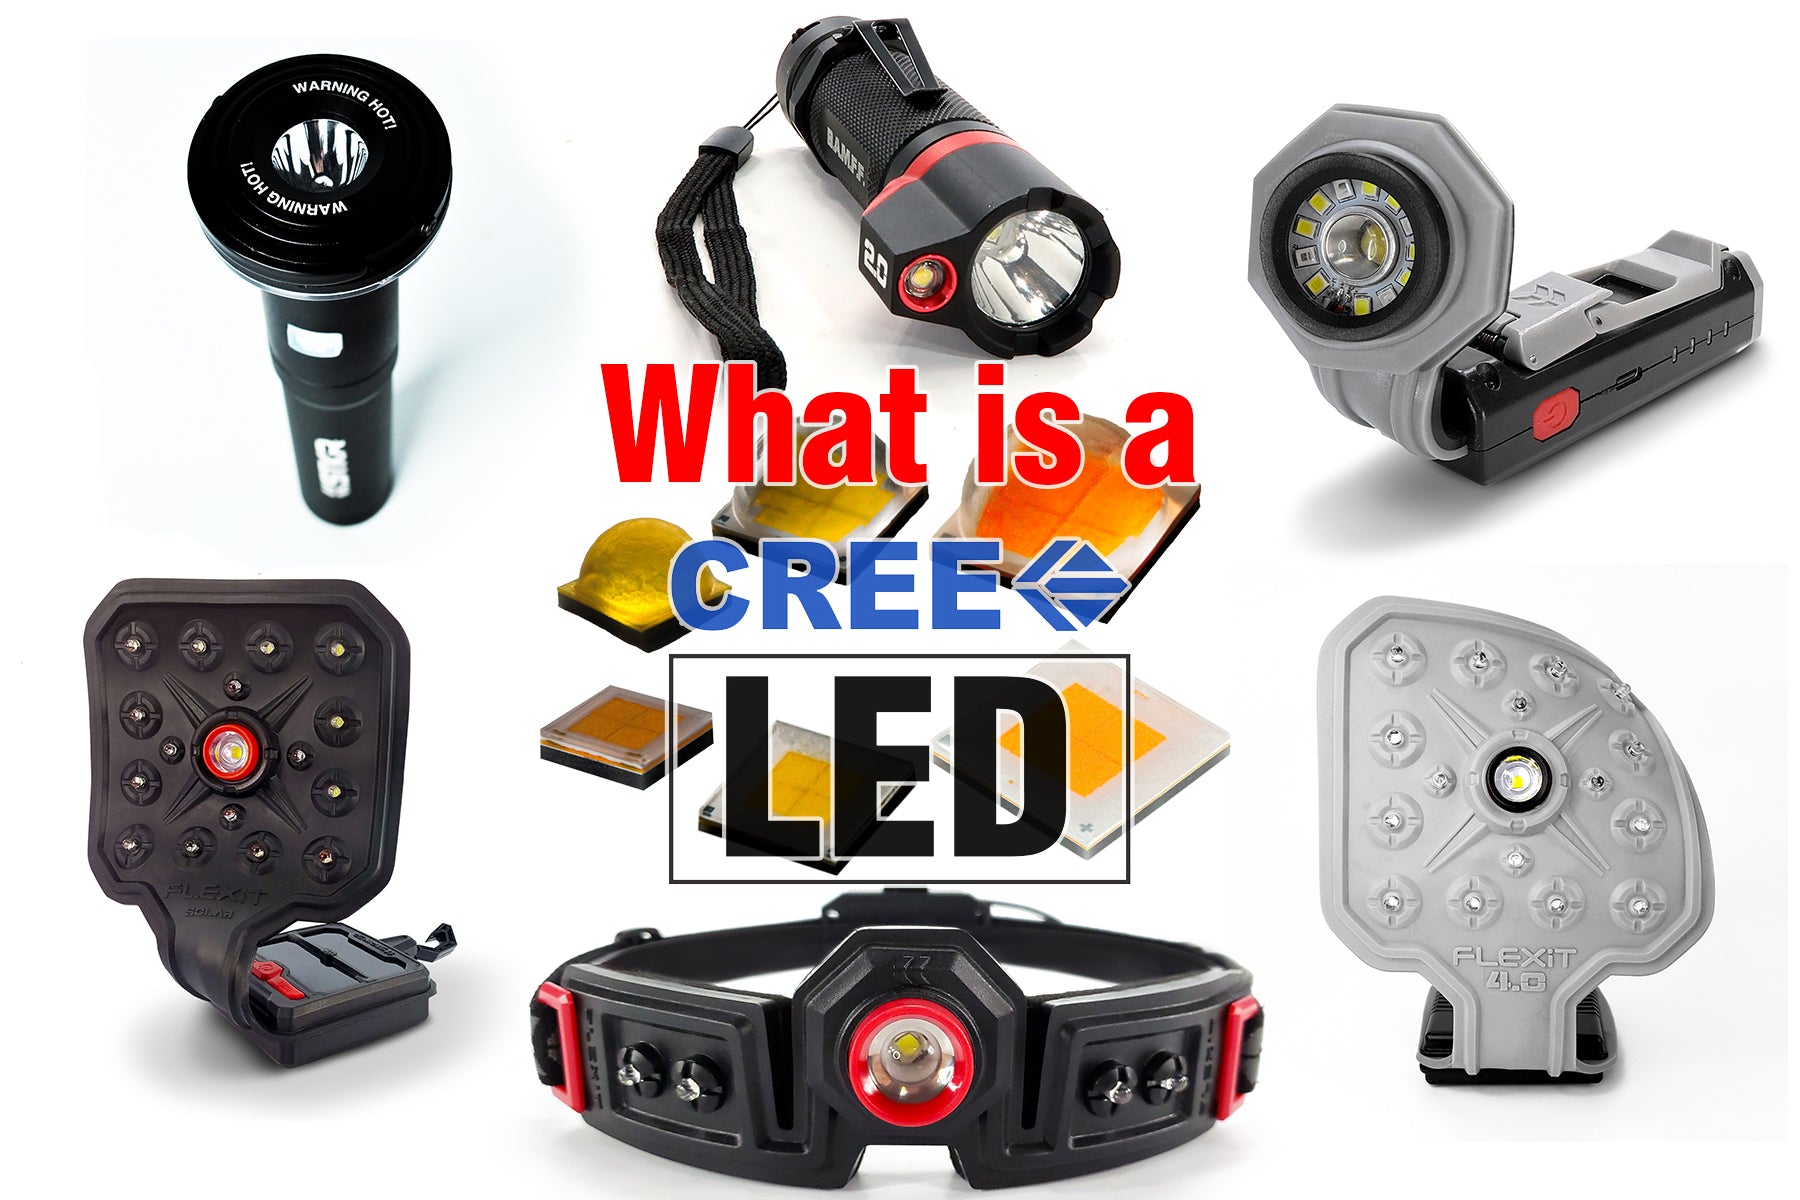 What is a CREE LED